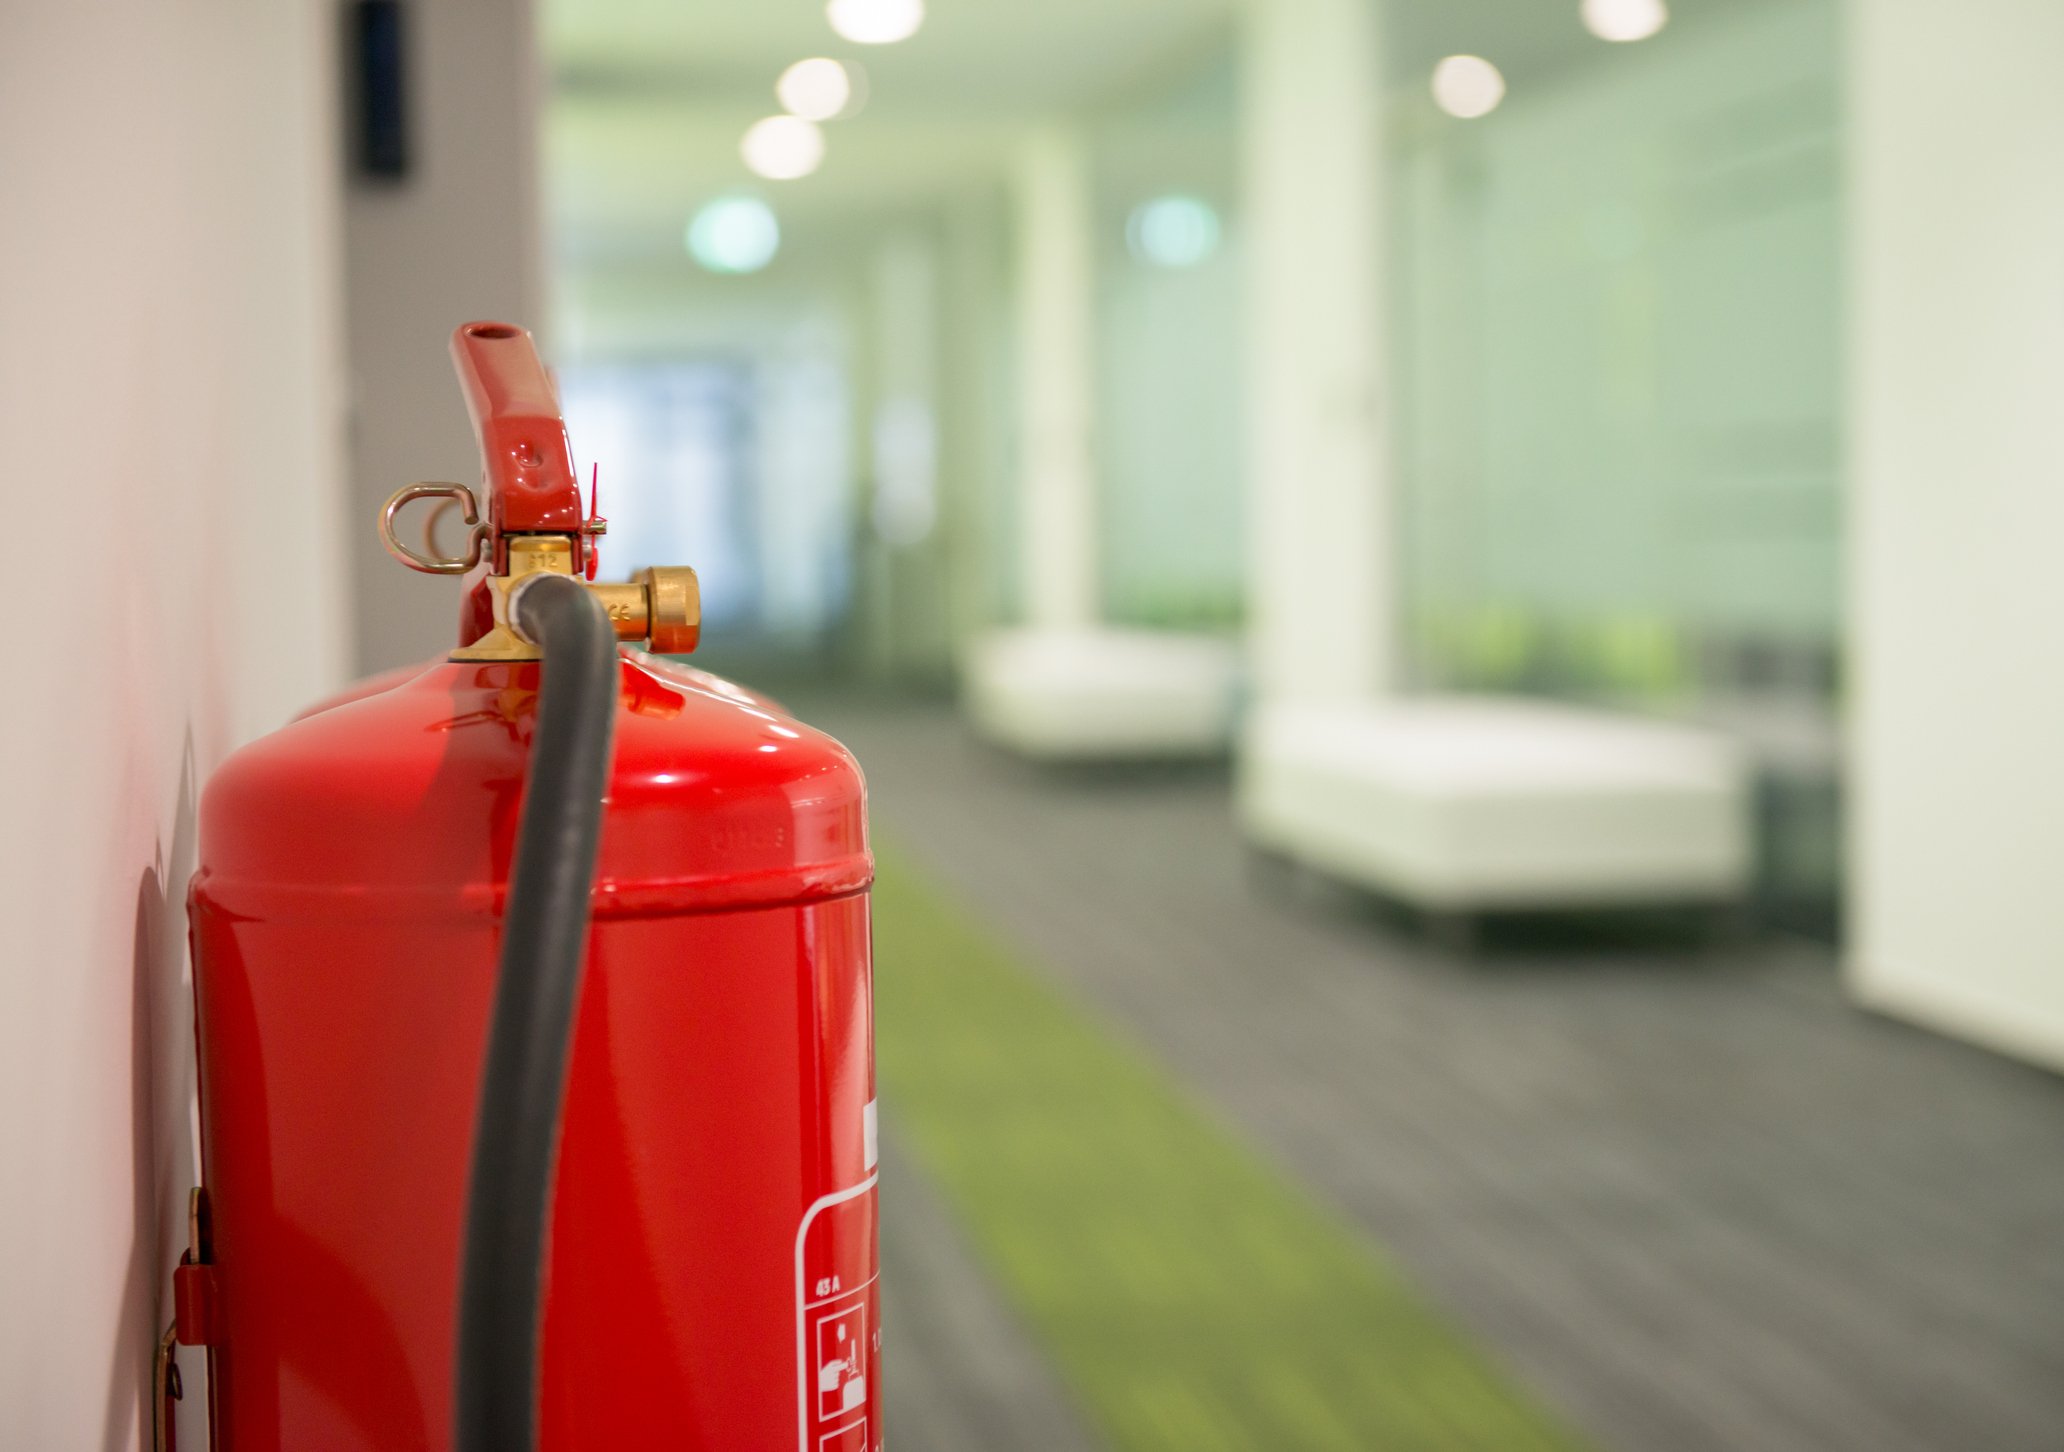 6 ways for hotels to improve fire safety | Hotel Management